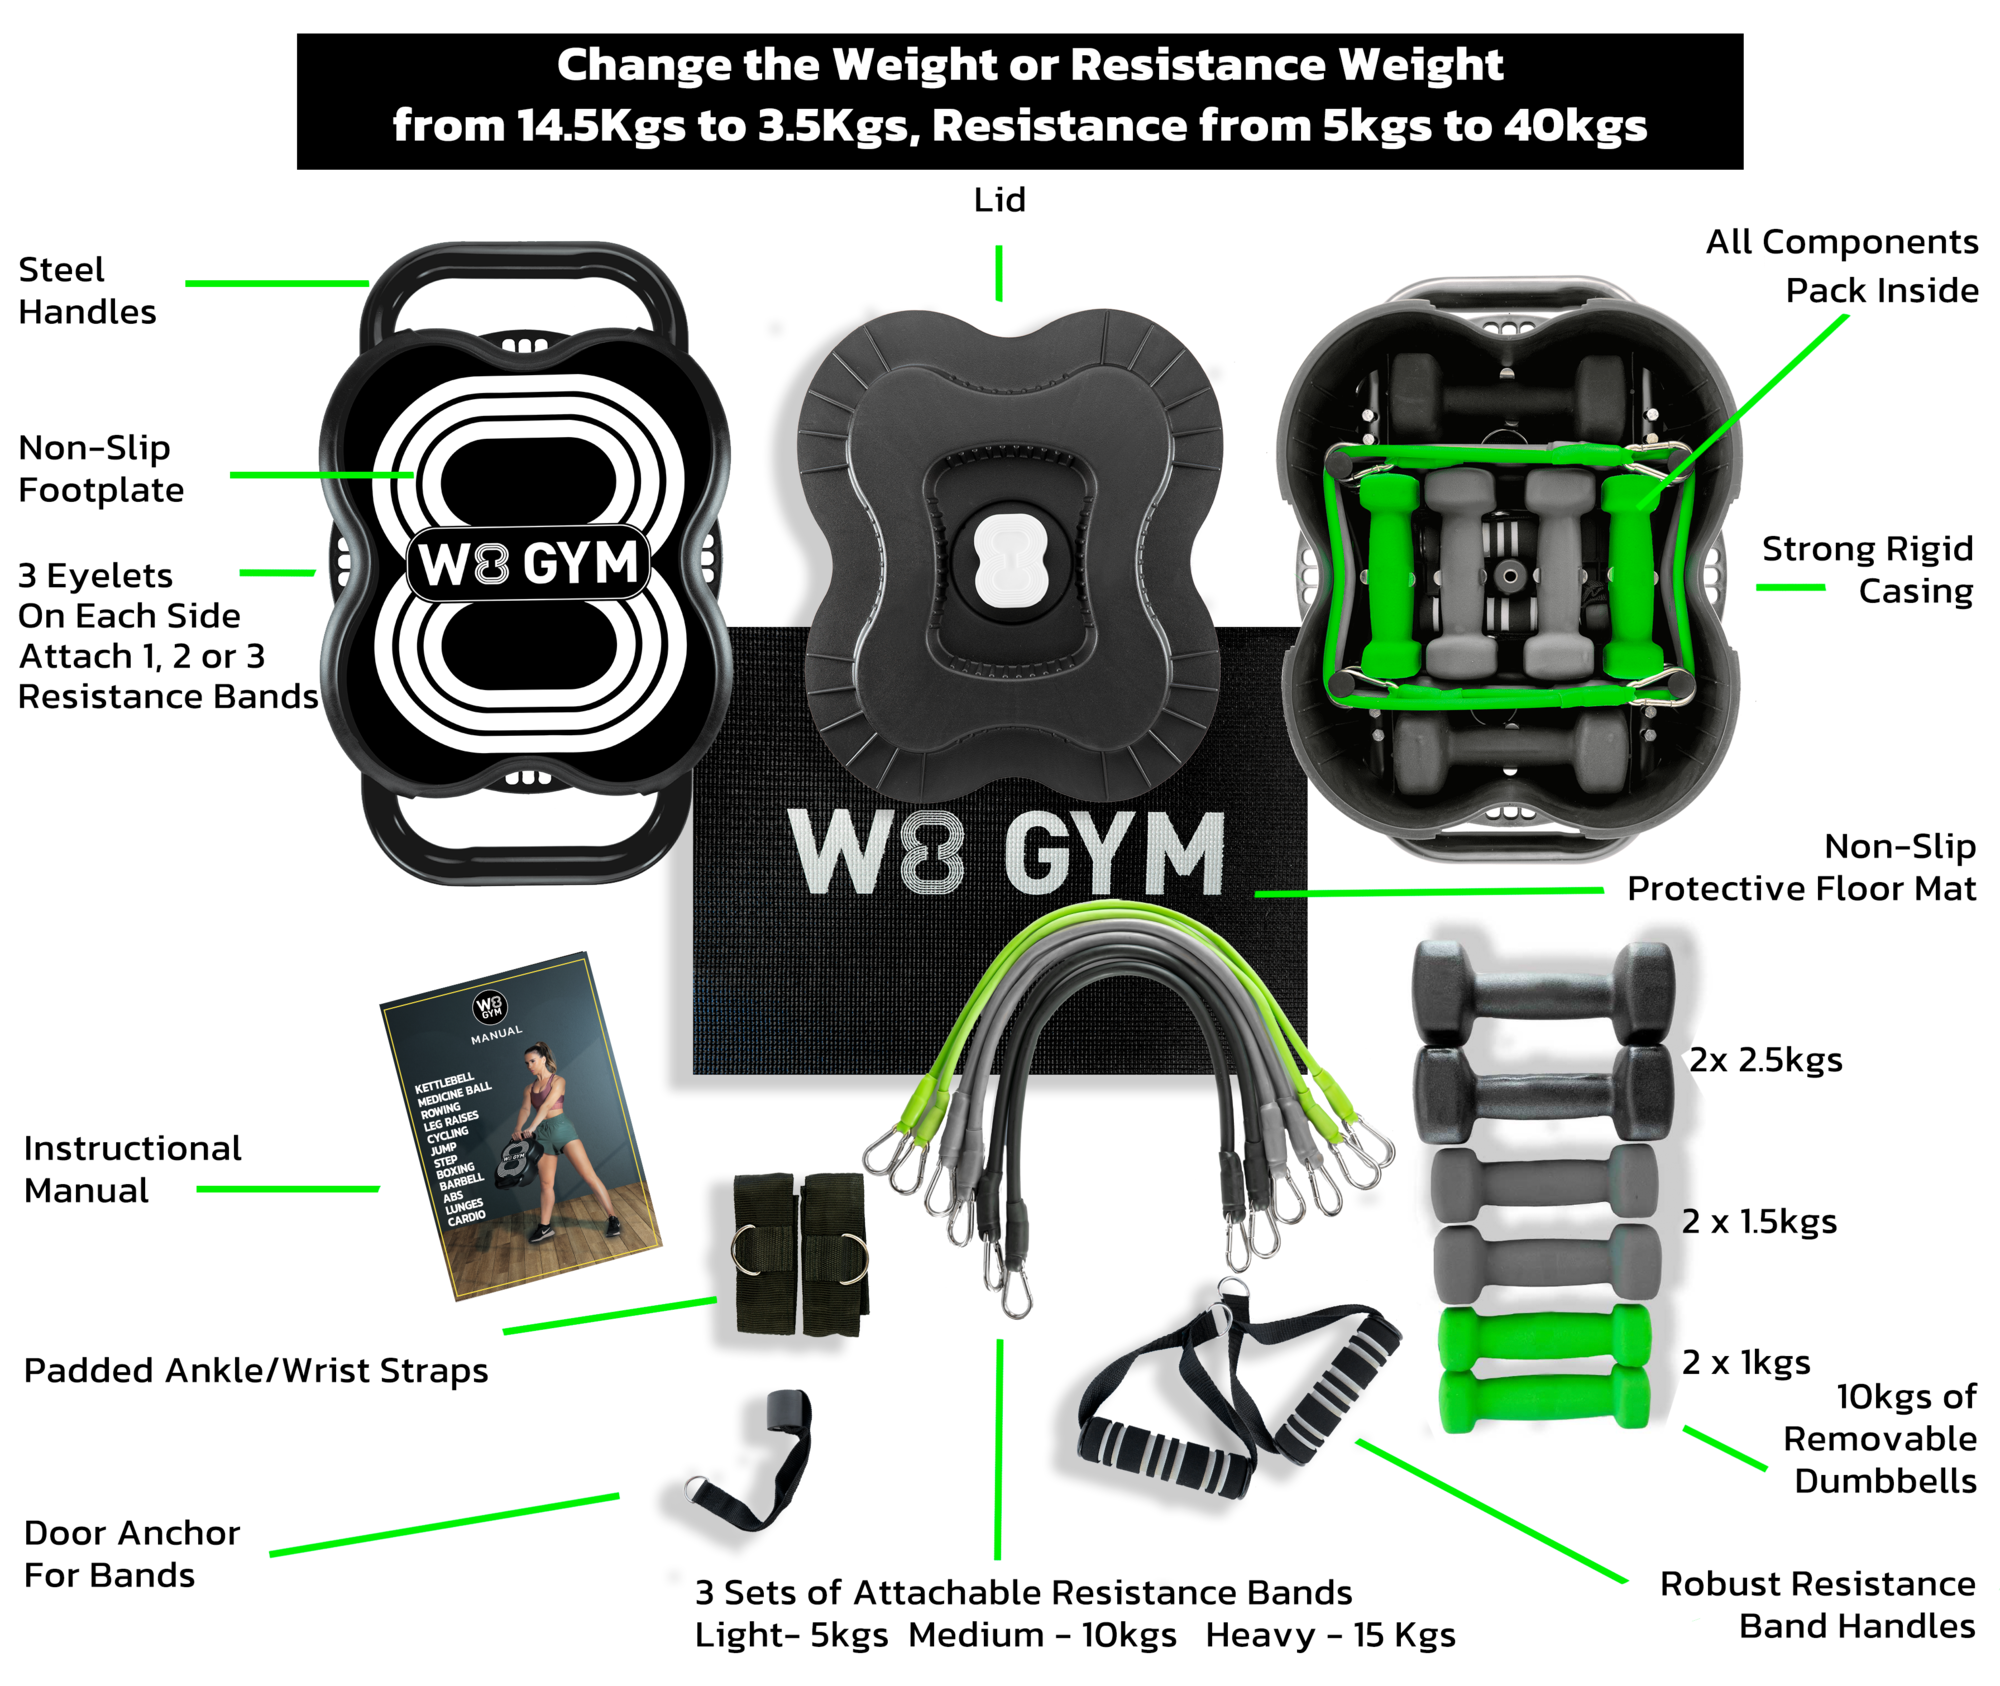 WHITE CONTENTS - W8 GYM